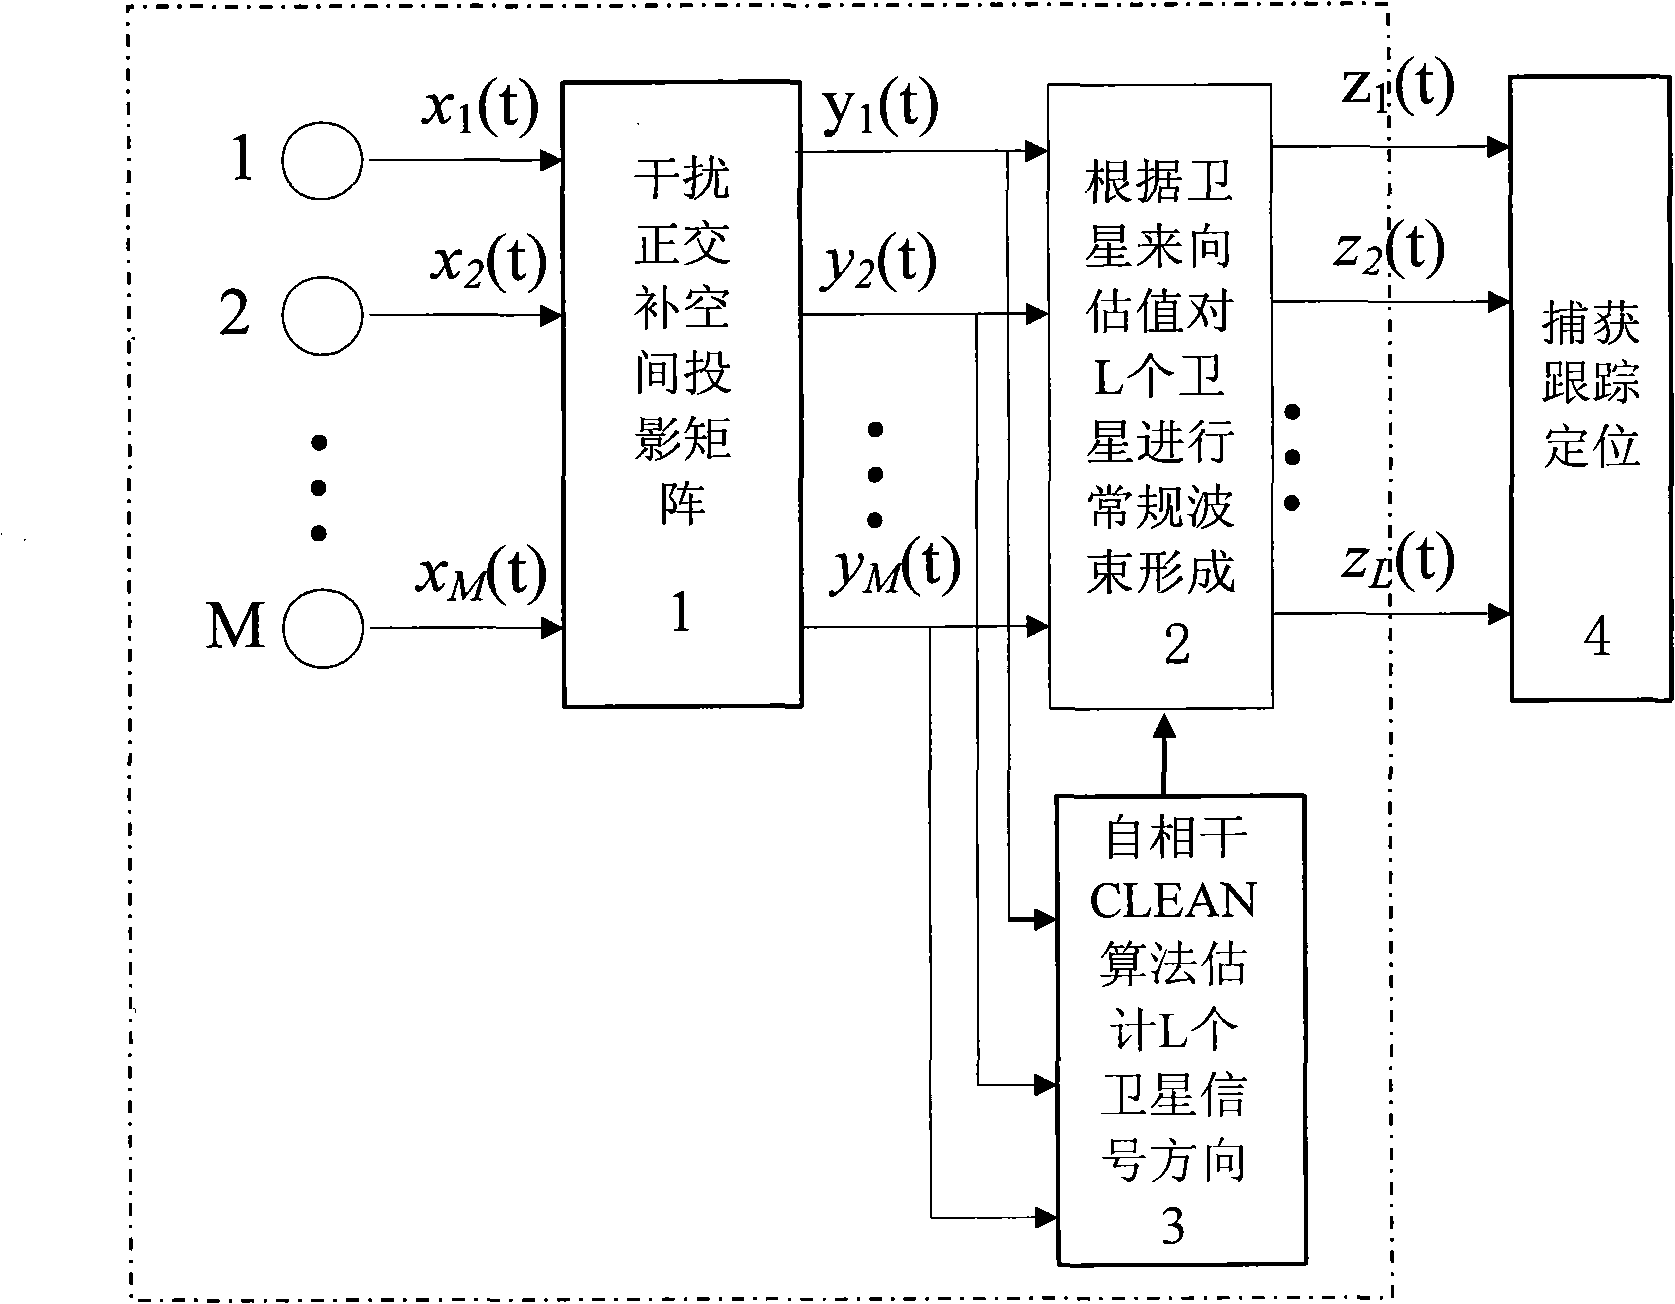 Self-coherent MUSIC algorithm-based global positioning system interference suppressing method